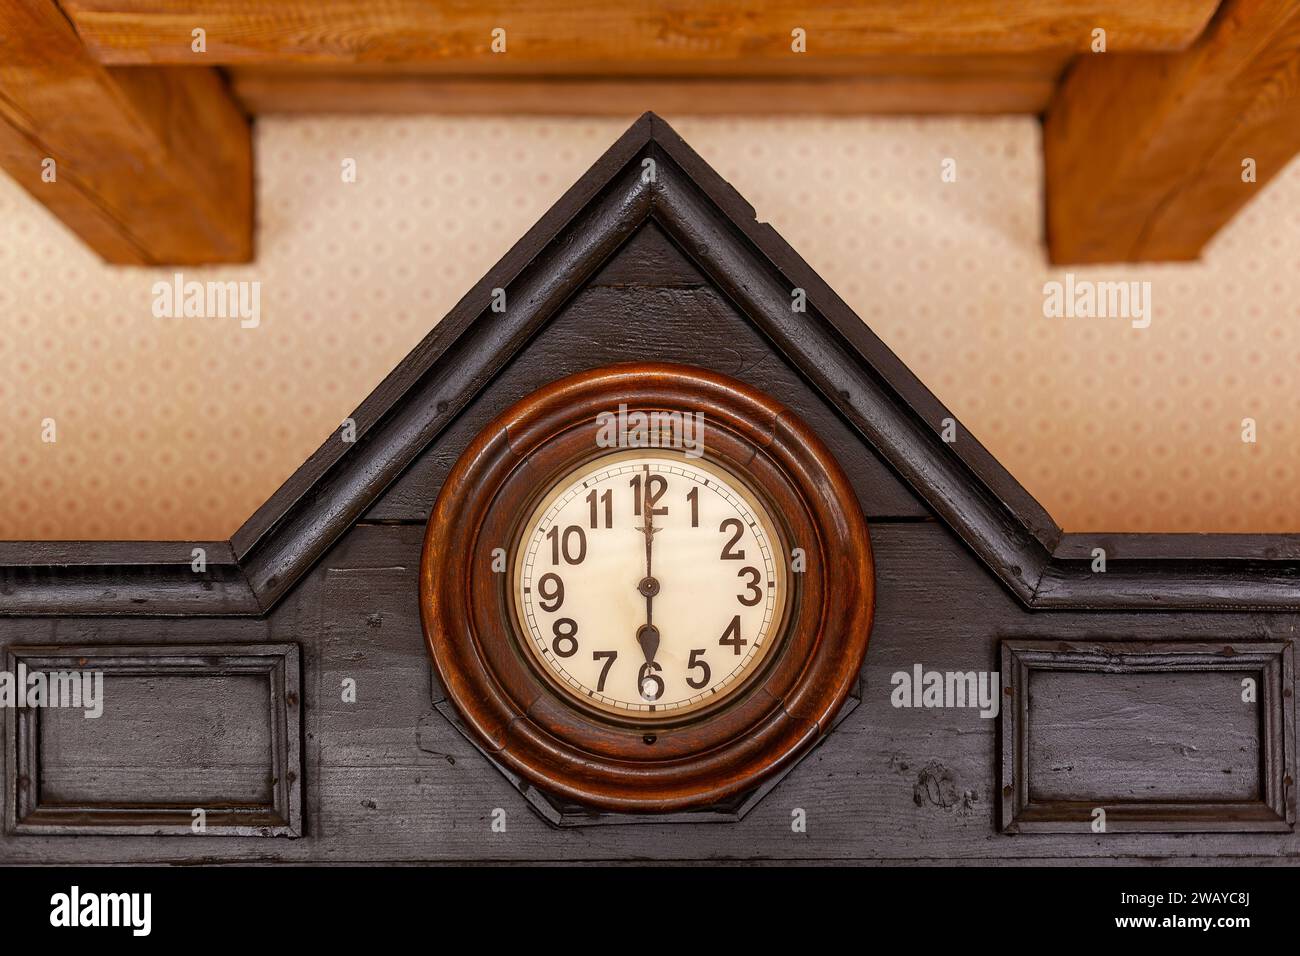 An antique German clock with a yellowed face is built into a roof-shaped brown wood cabinet. Stock Photo